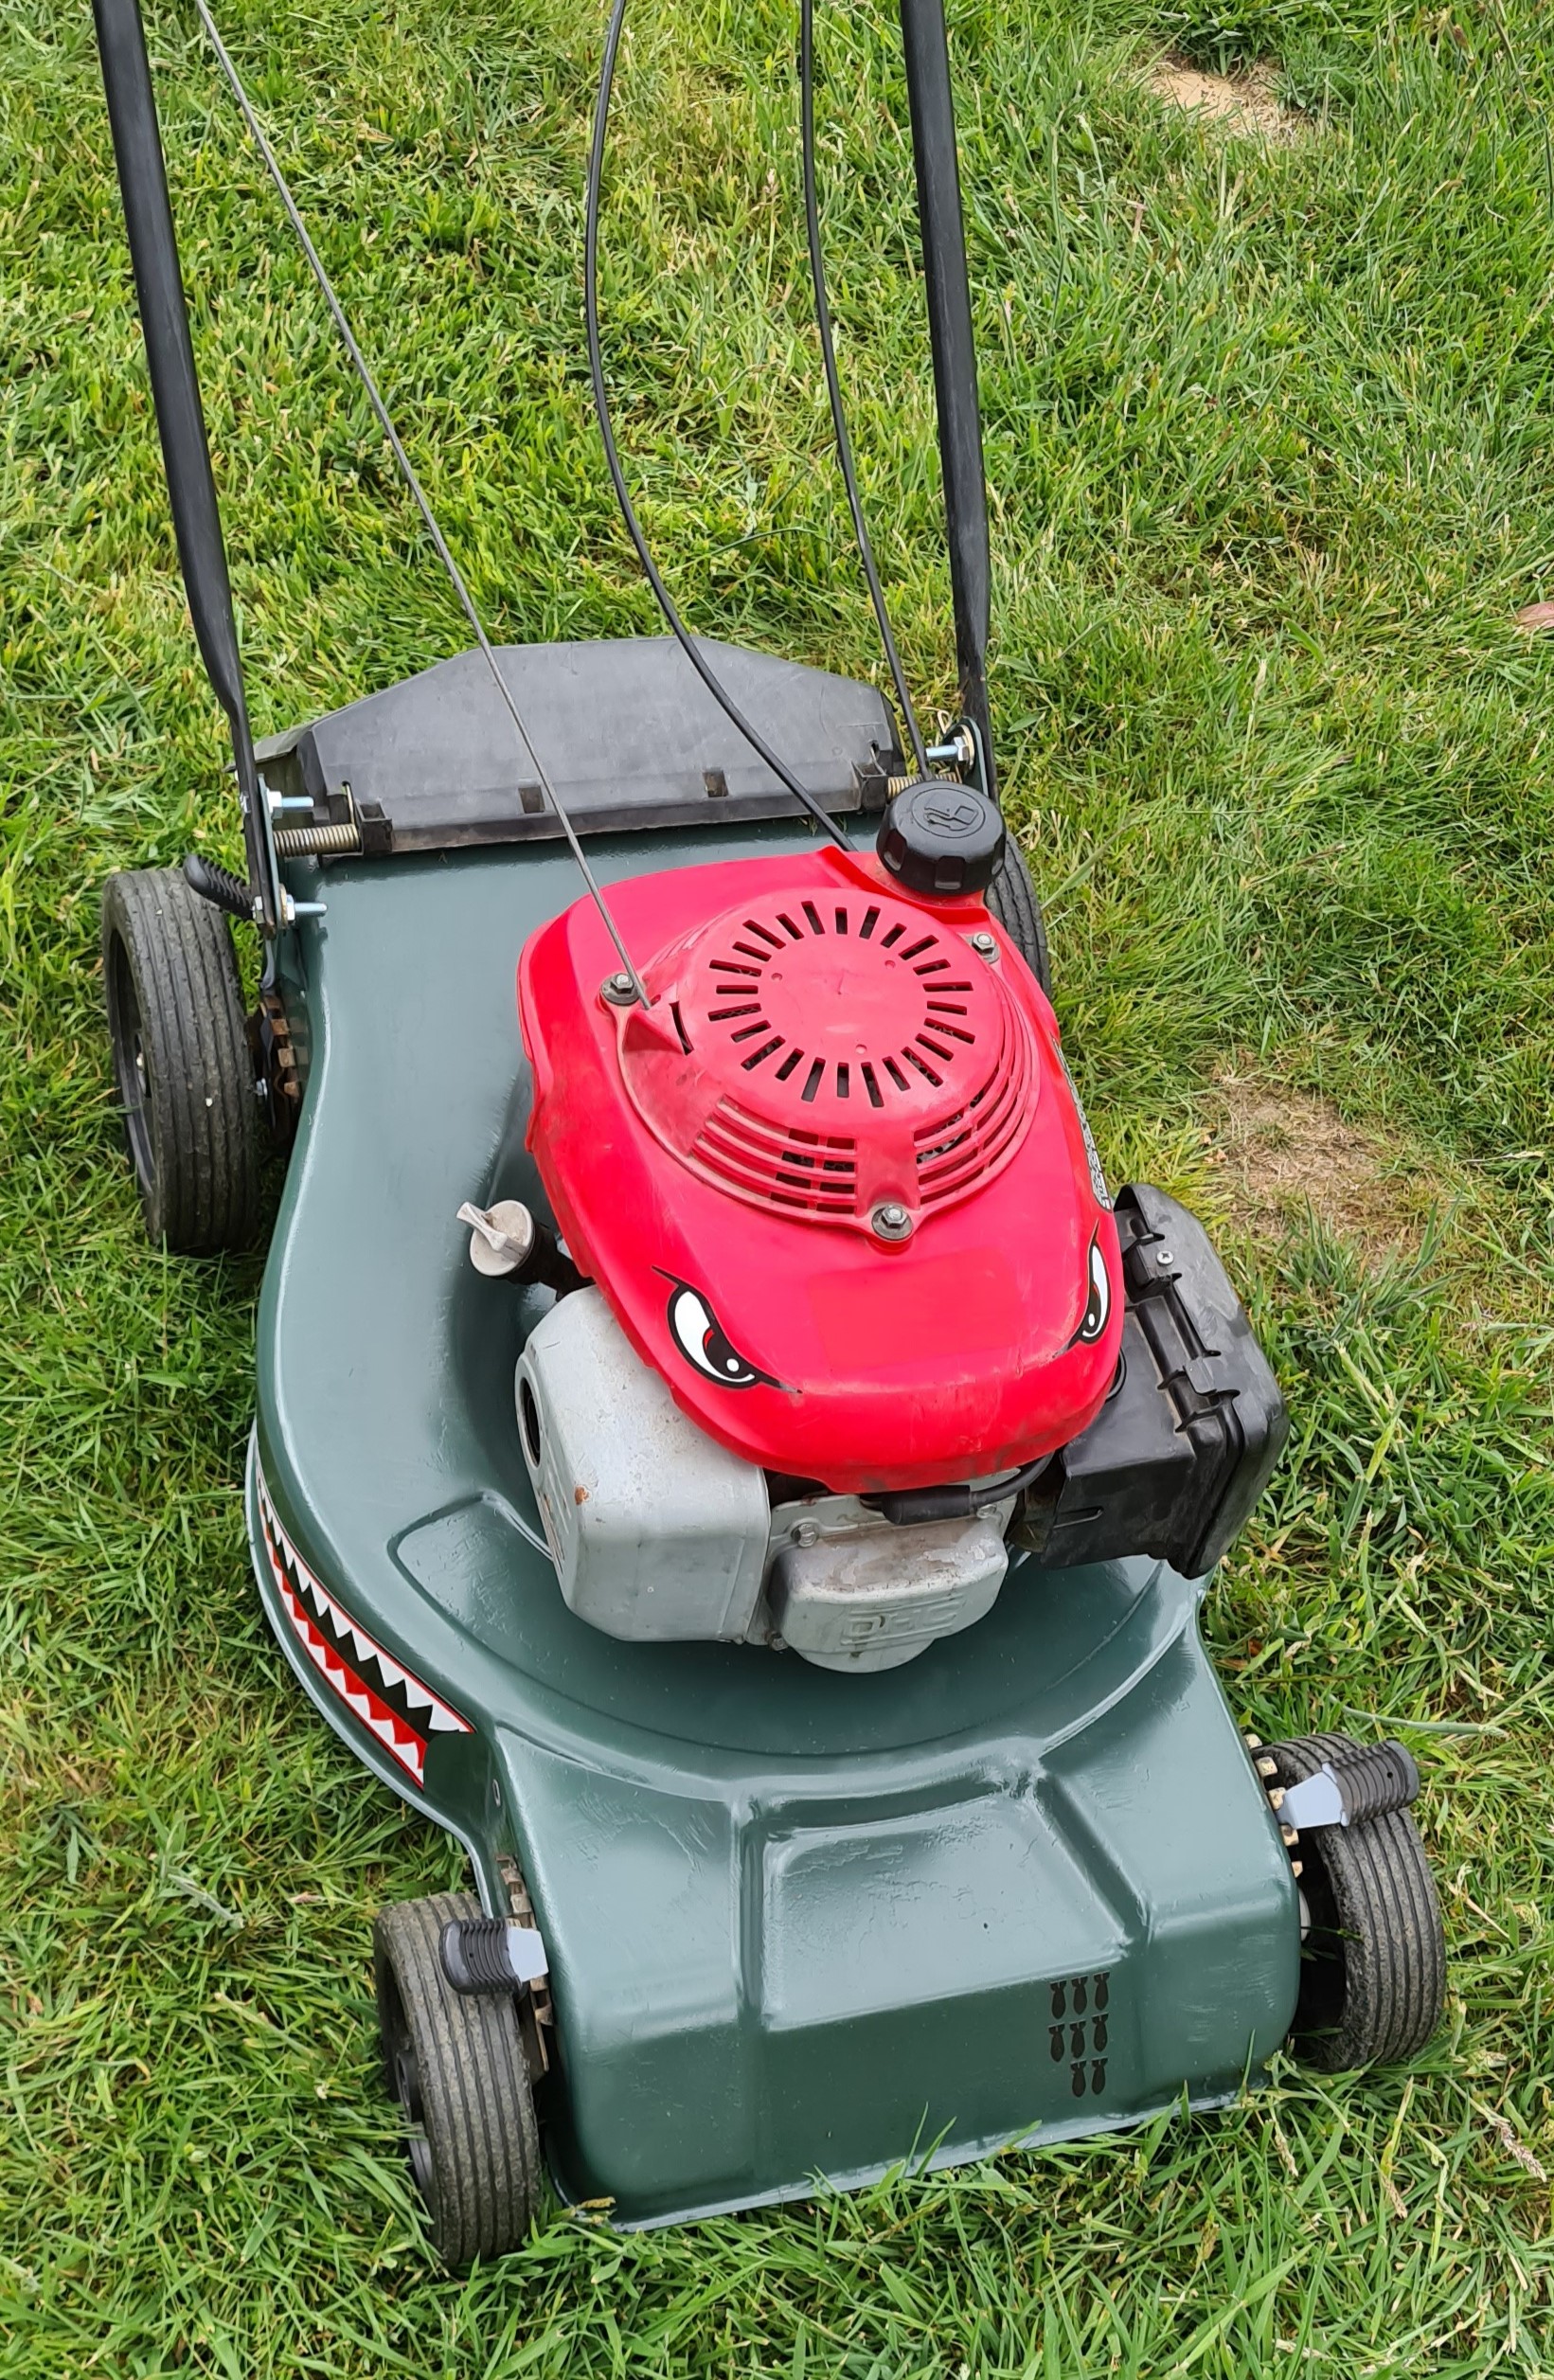 Show us your......lawnmower ! - Page 14 - Homes, Gardens and DIY - PistonHeads